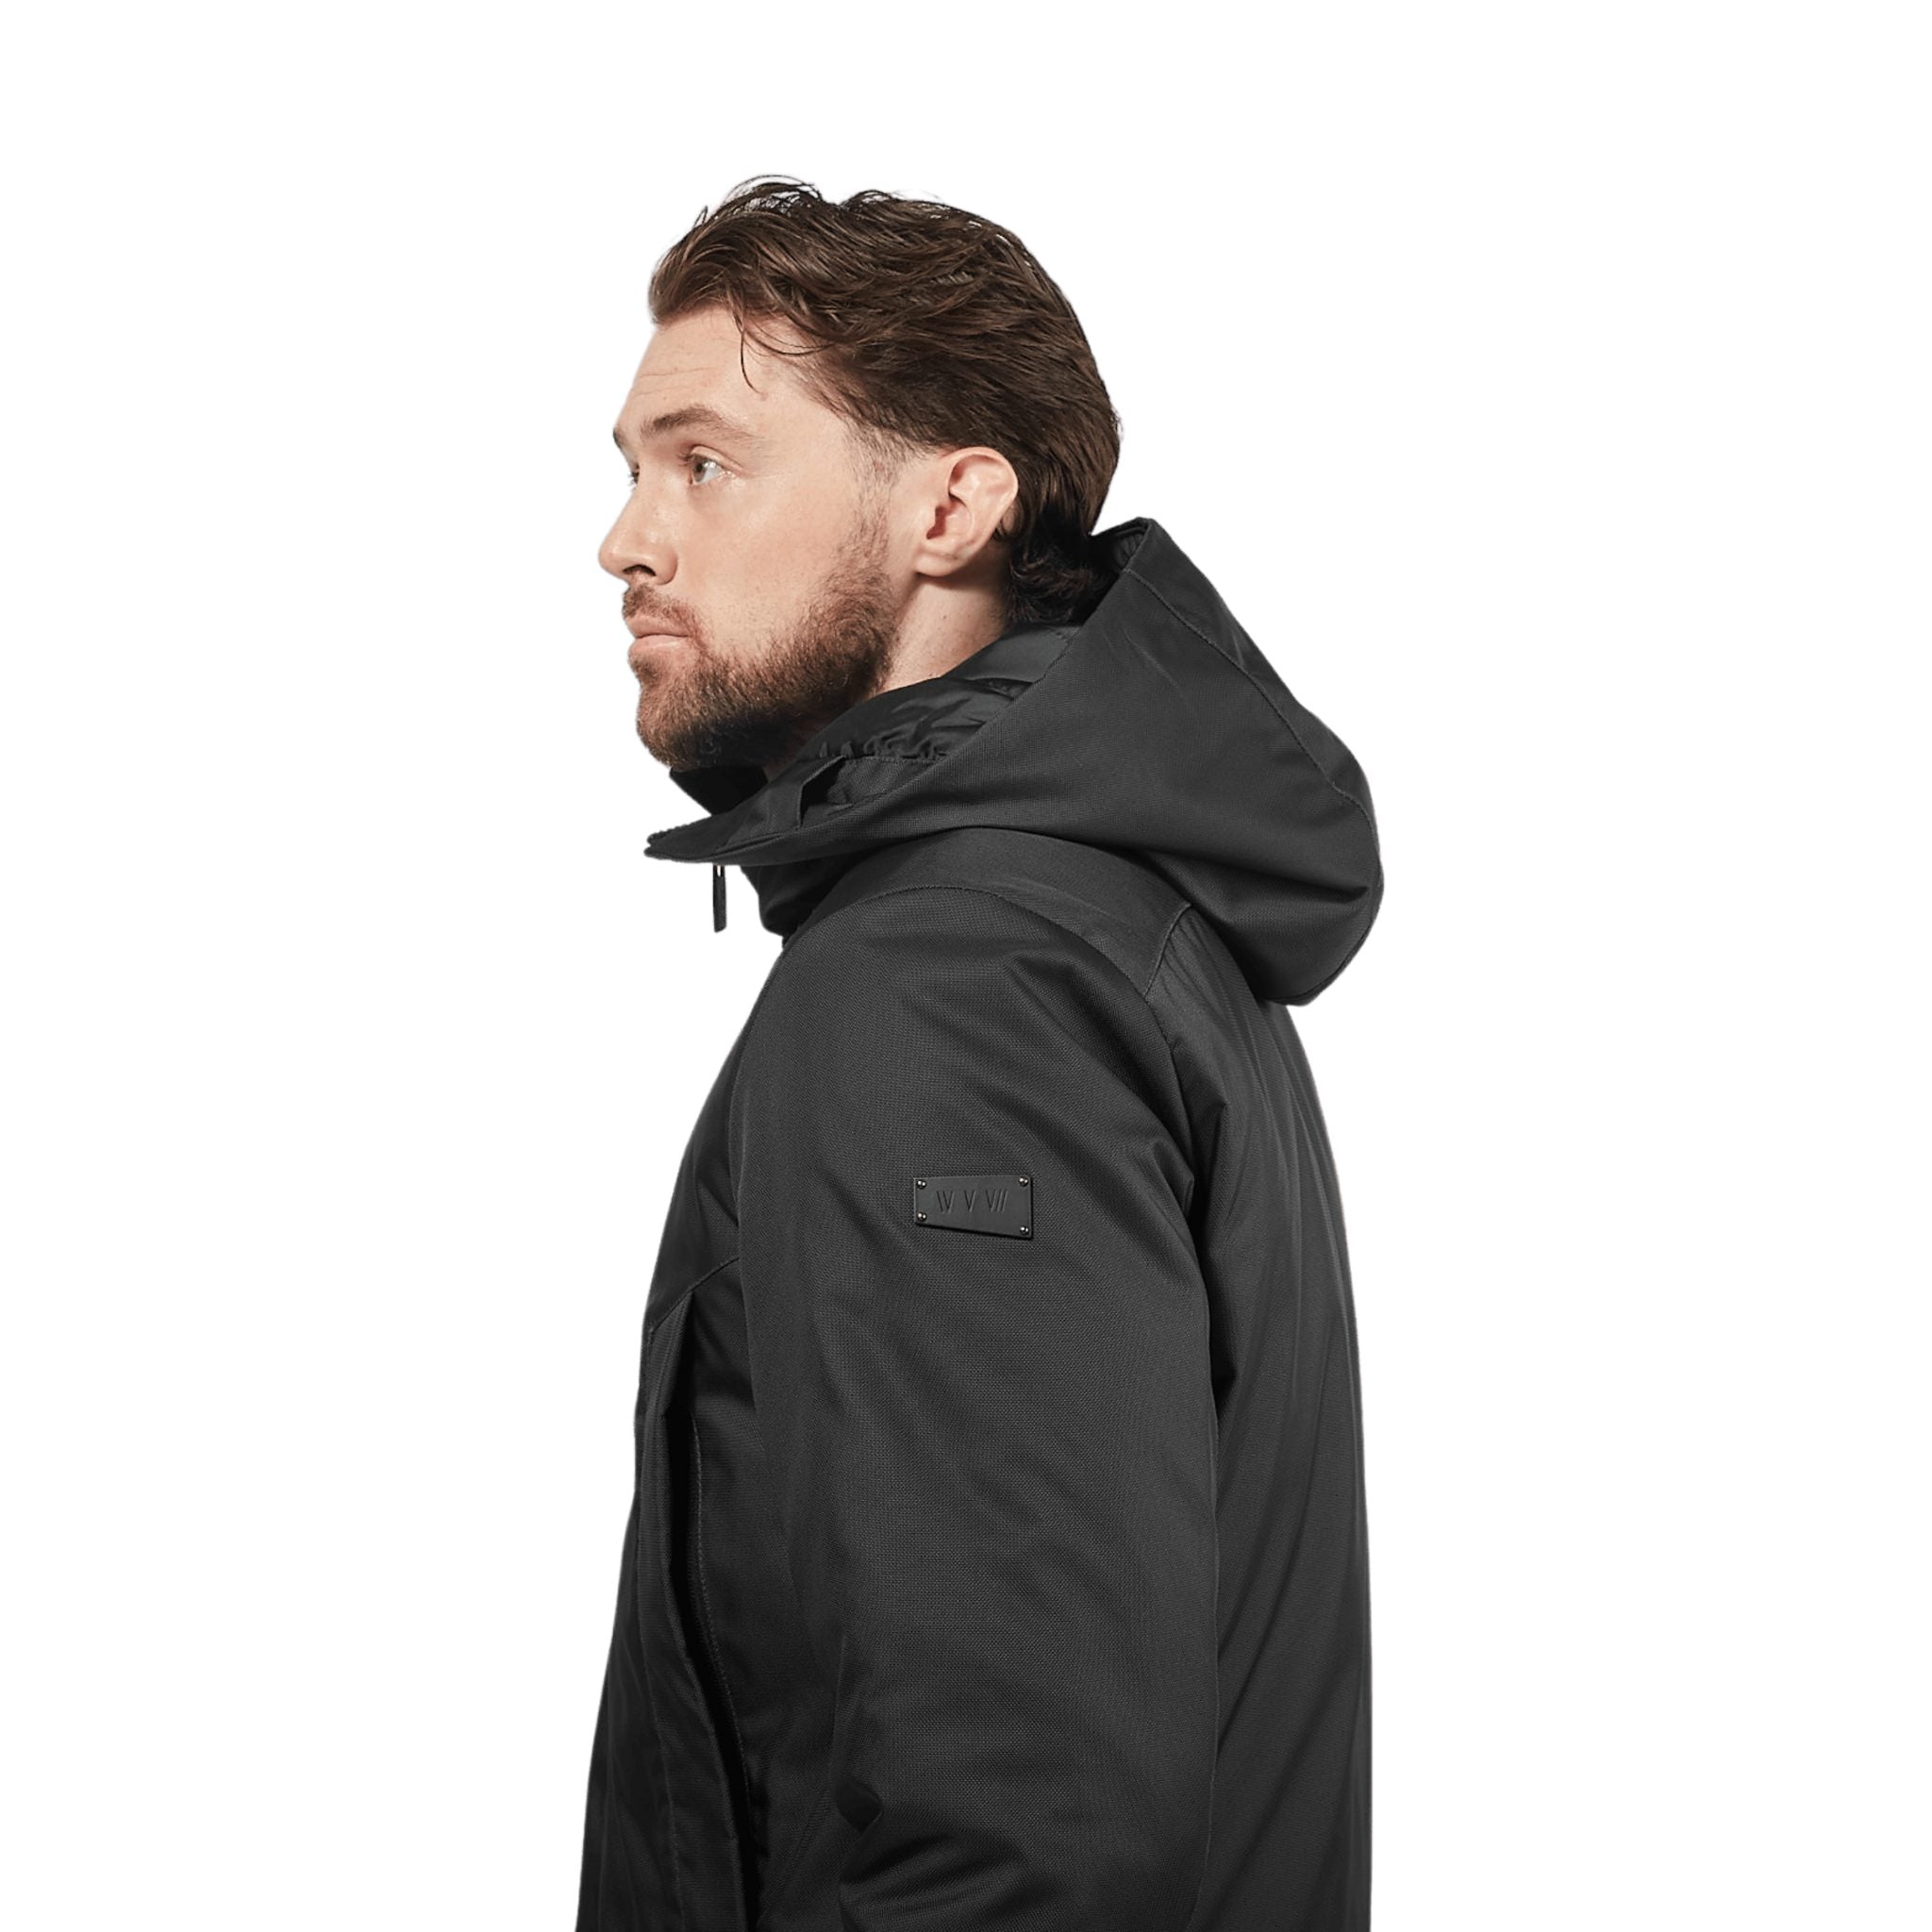 male model stands, the camera is closing up on the side details of the jacket, wearing a black utilitarian style waist length jacket on a white background.